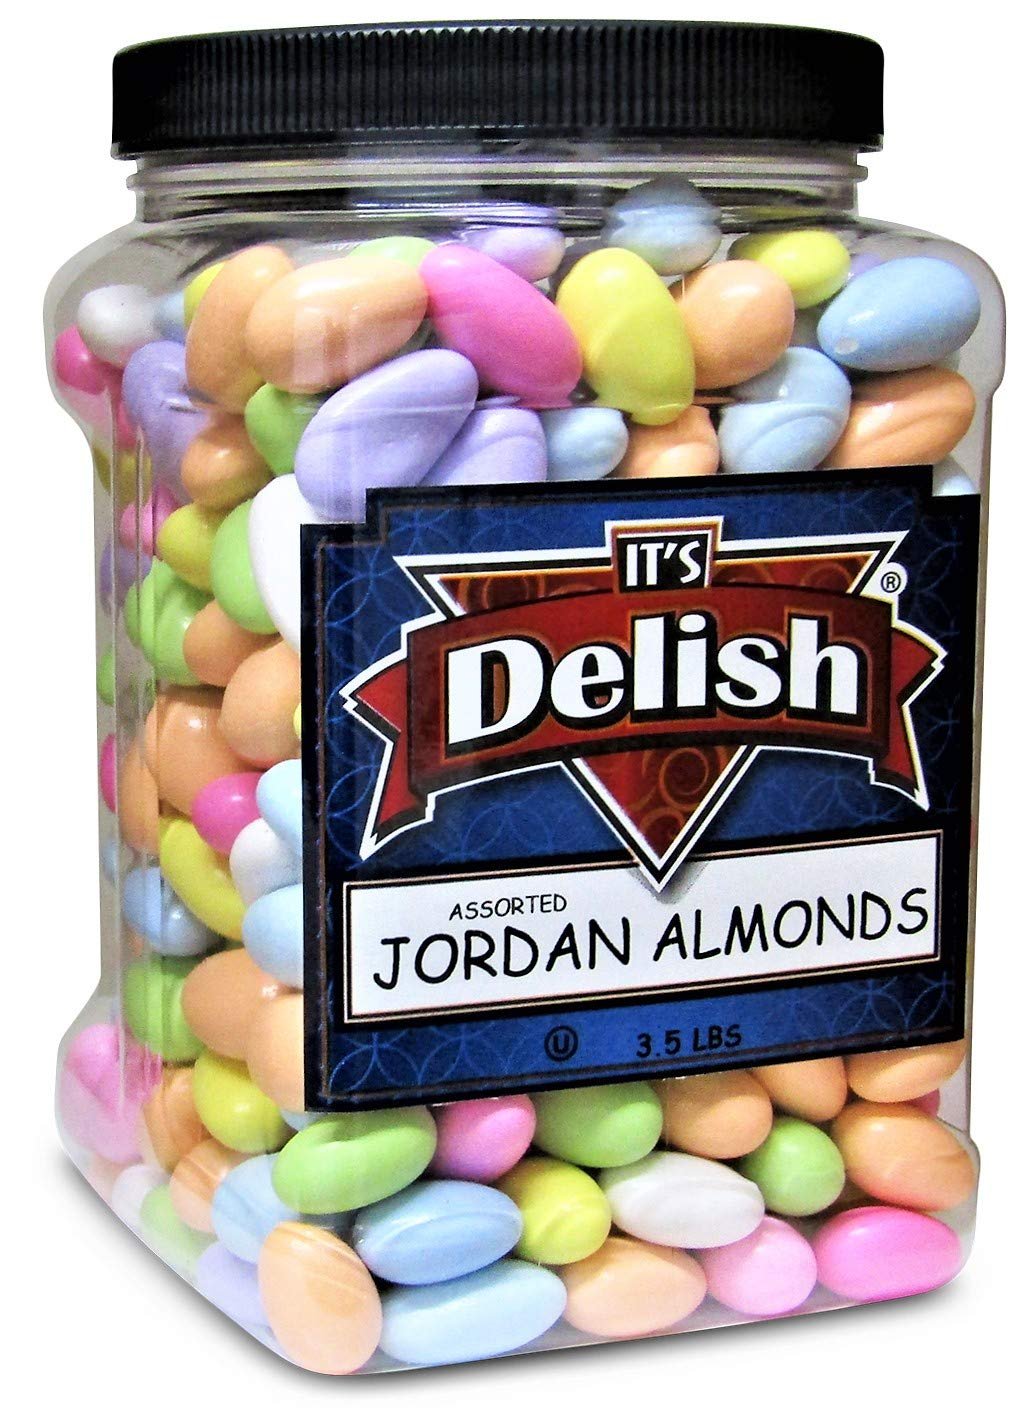 It's Delish Assorted Jordan Almonds , 3.5 lbs Jumbo Container | Pastel Colors Kosher Almond Nut with Sweet Hard Candy Coating